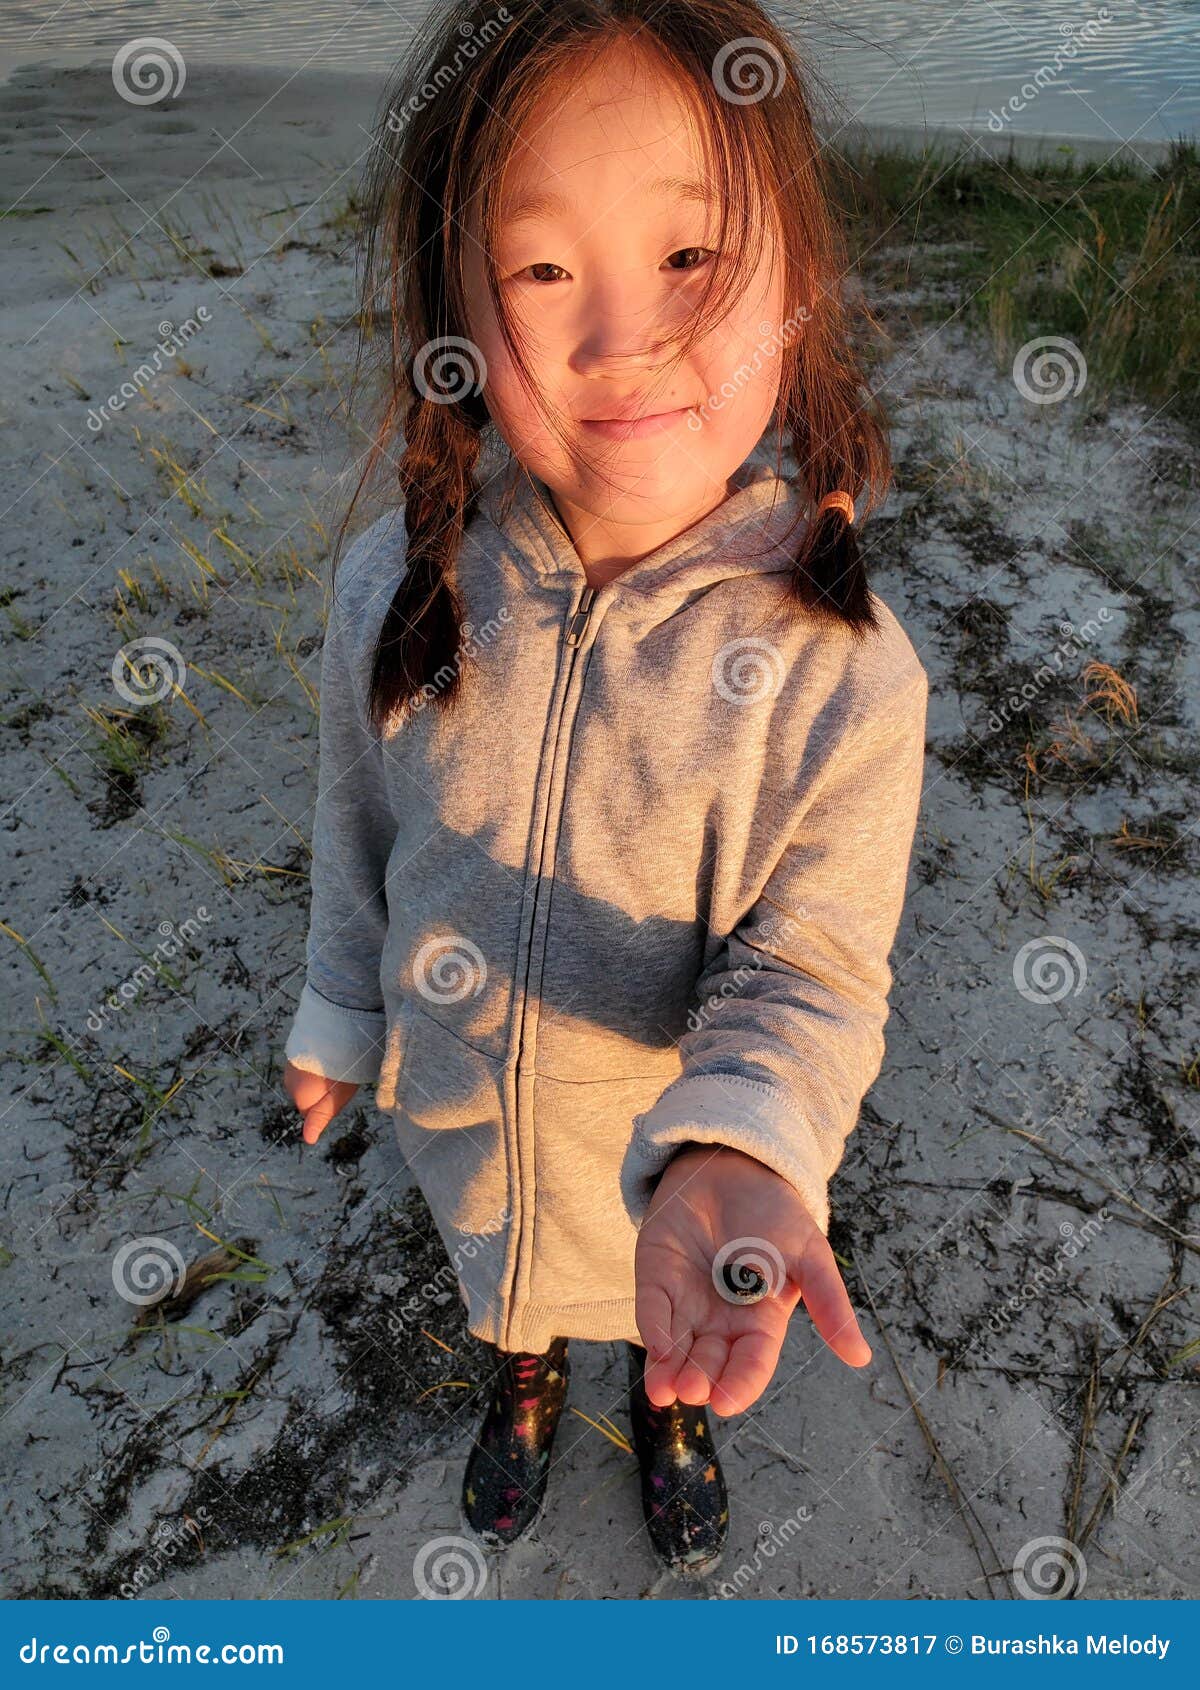 Beautiful Little Girl Playing with Nature Stock Image - Image of little ...